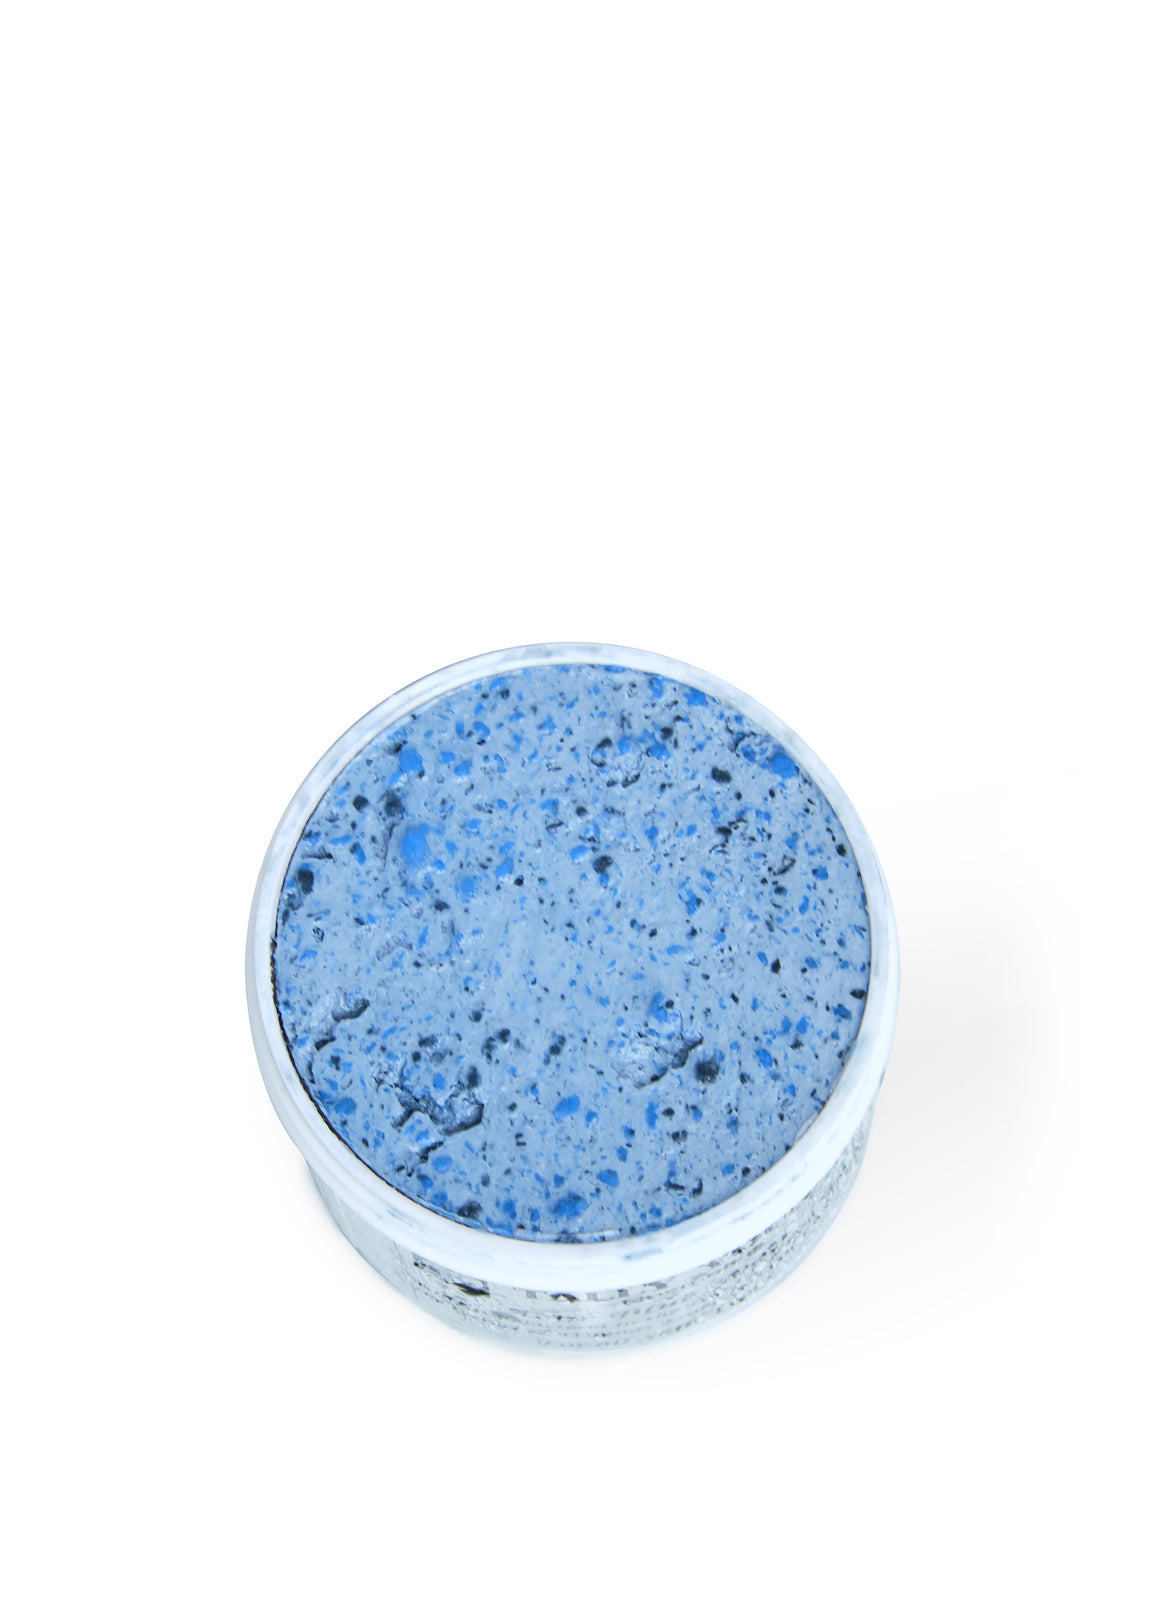 Special Blue Face Soap